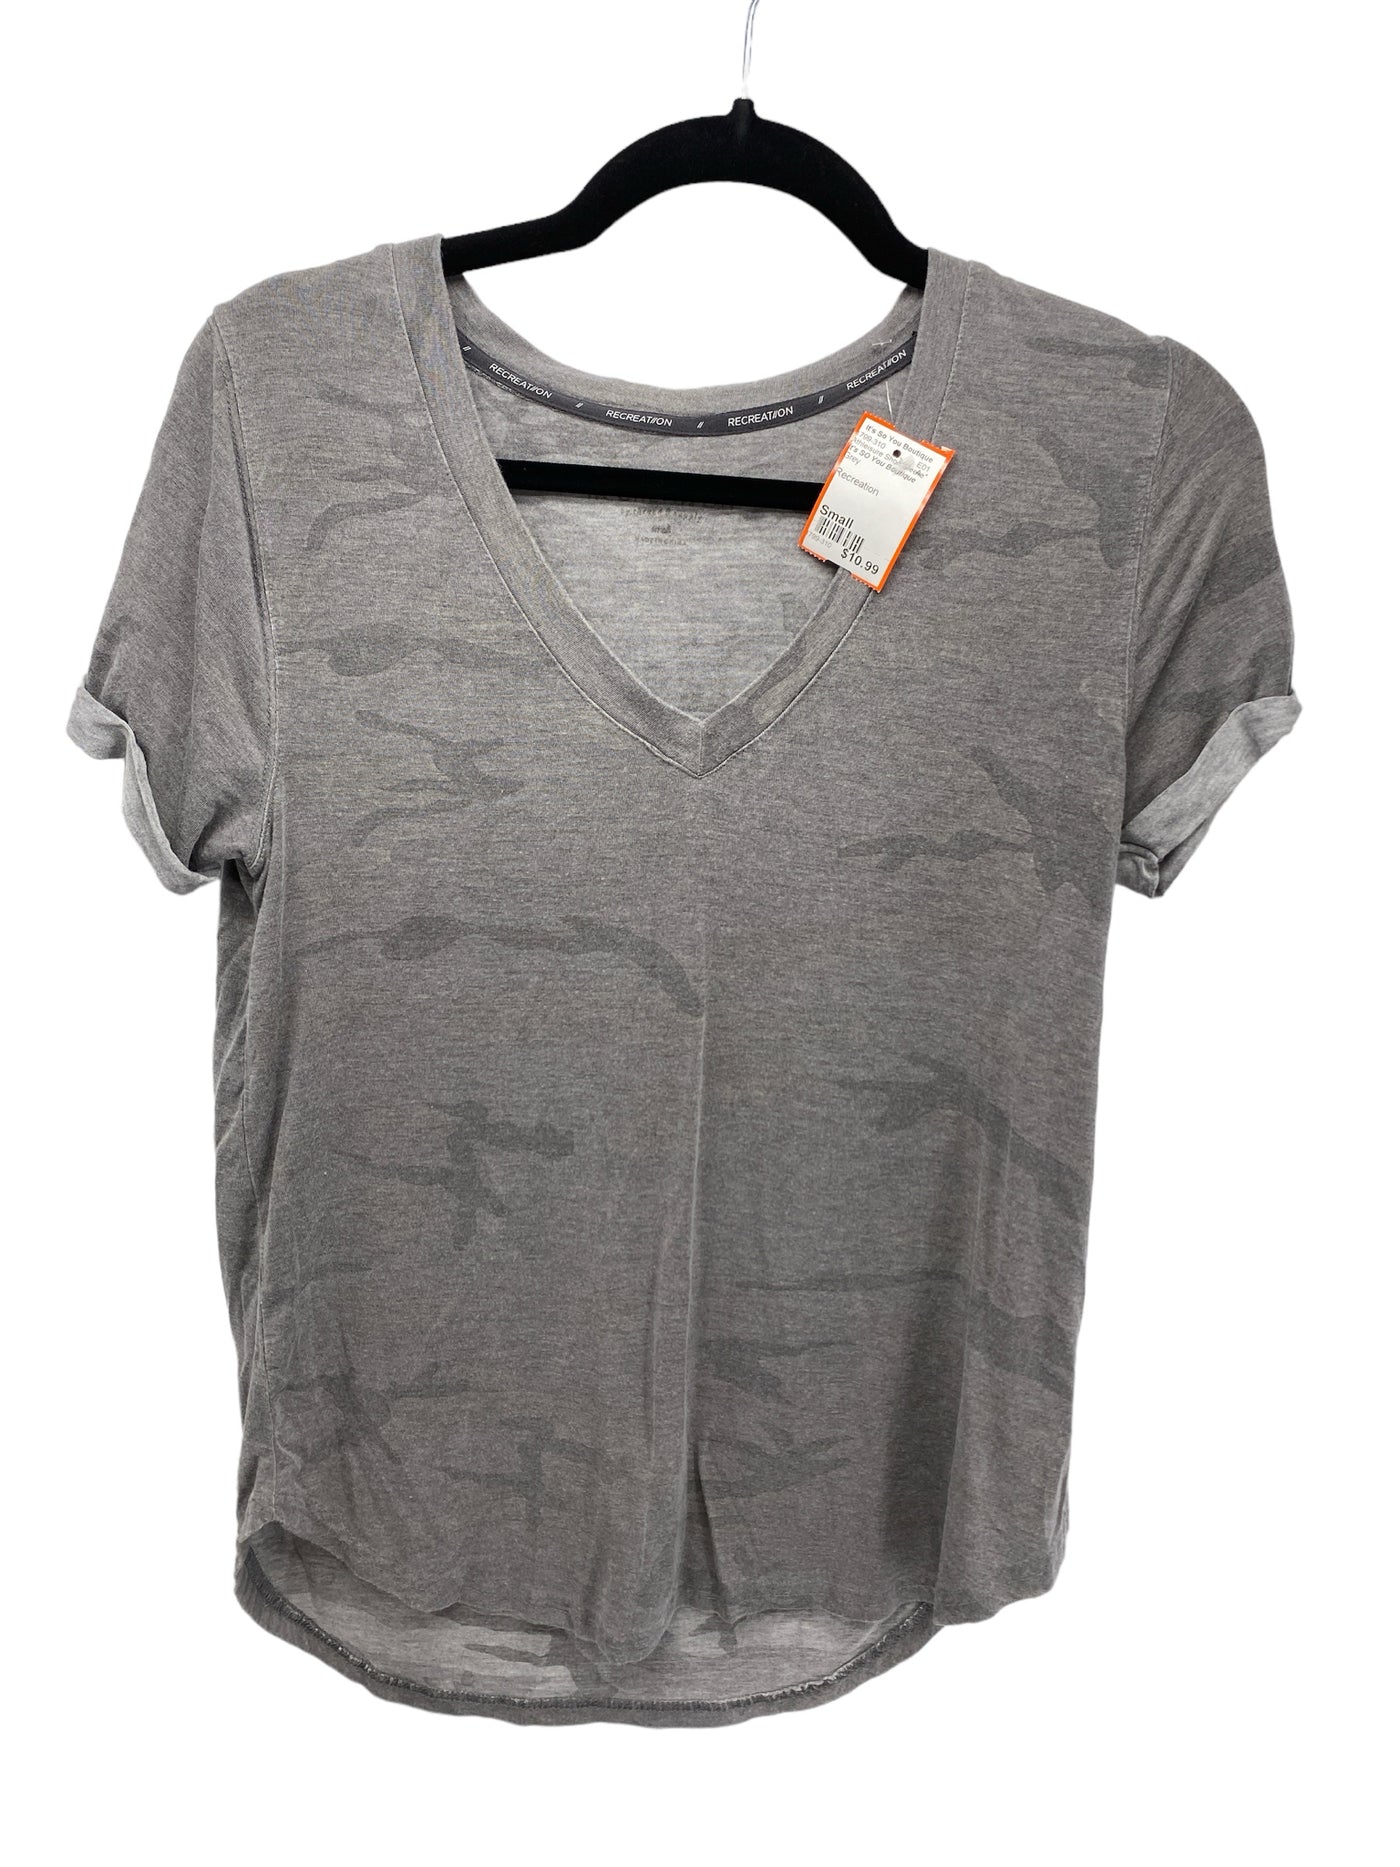 It's SO You Boutique Misses Size Small Grey Athleisure Short Sleeve